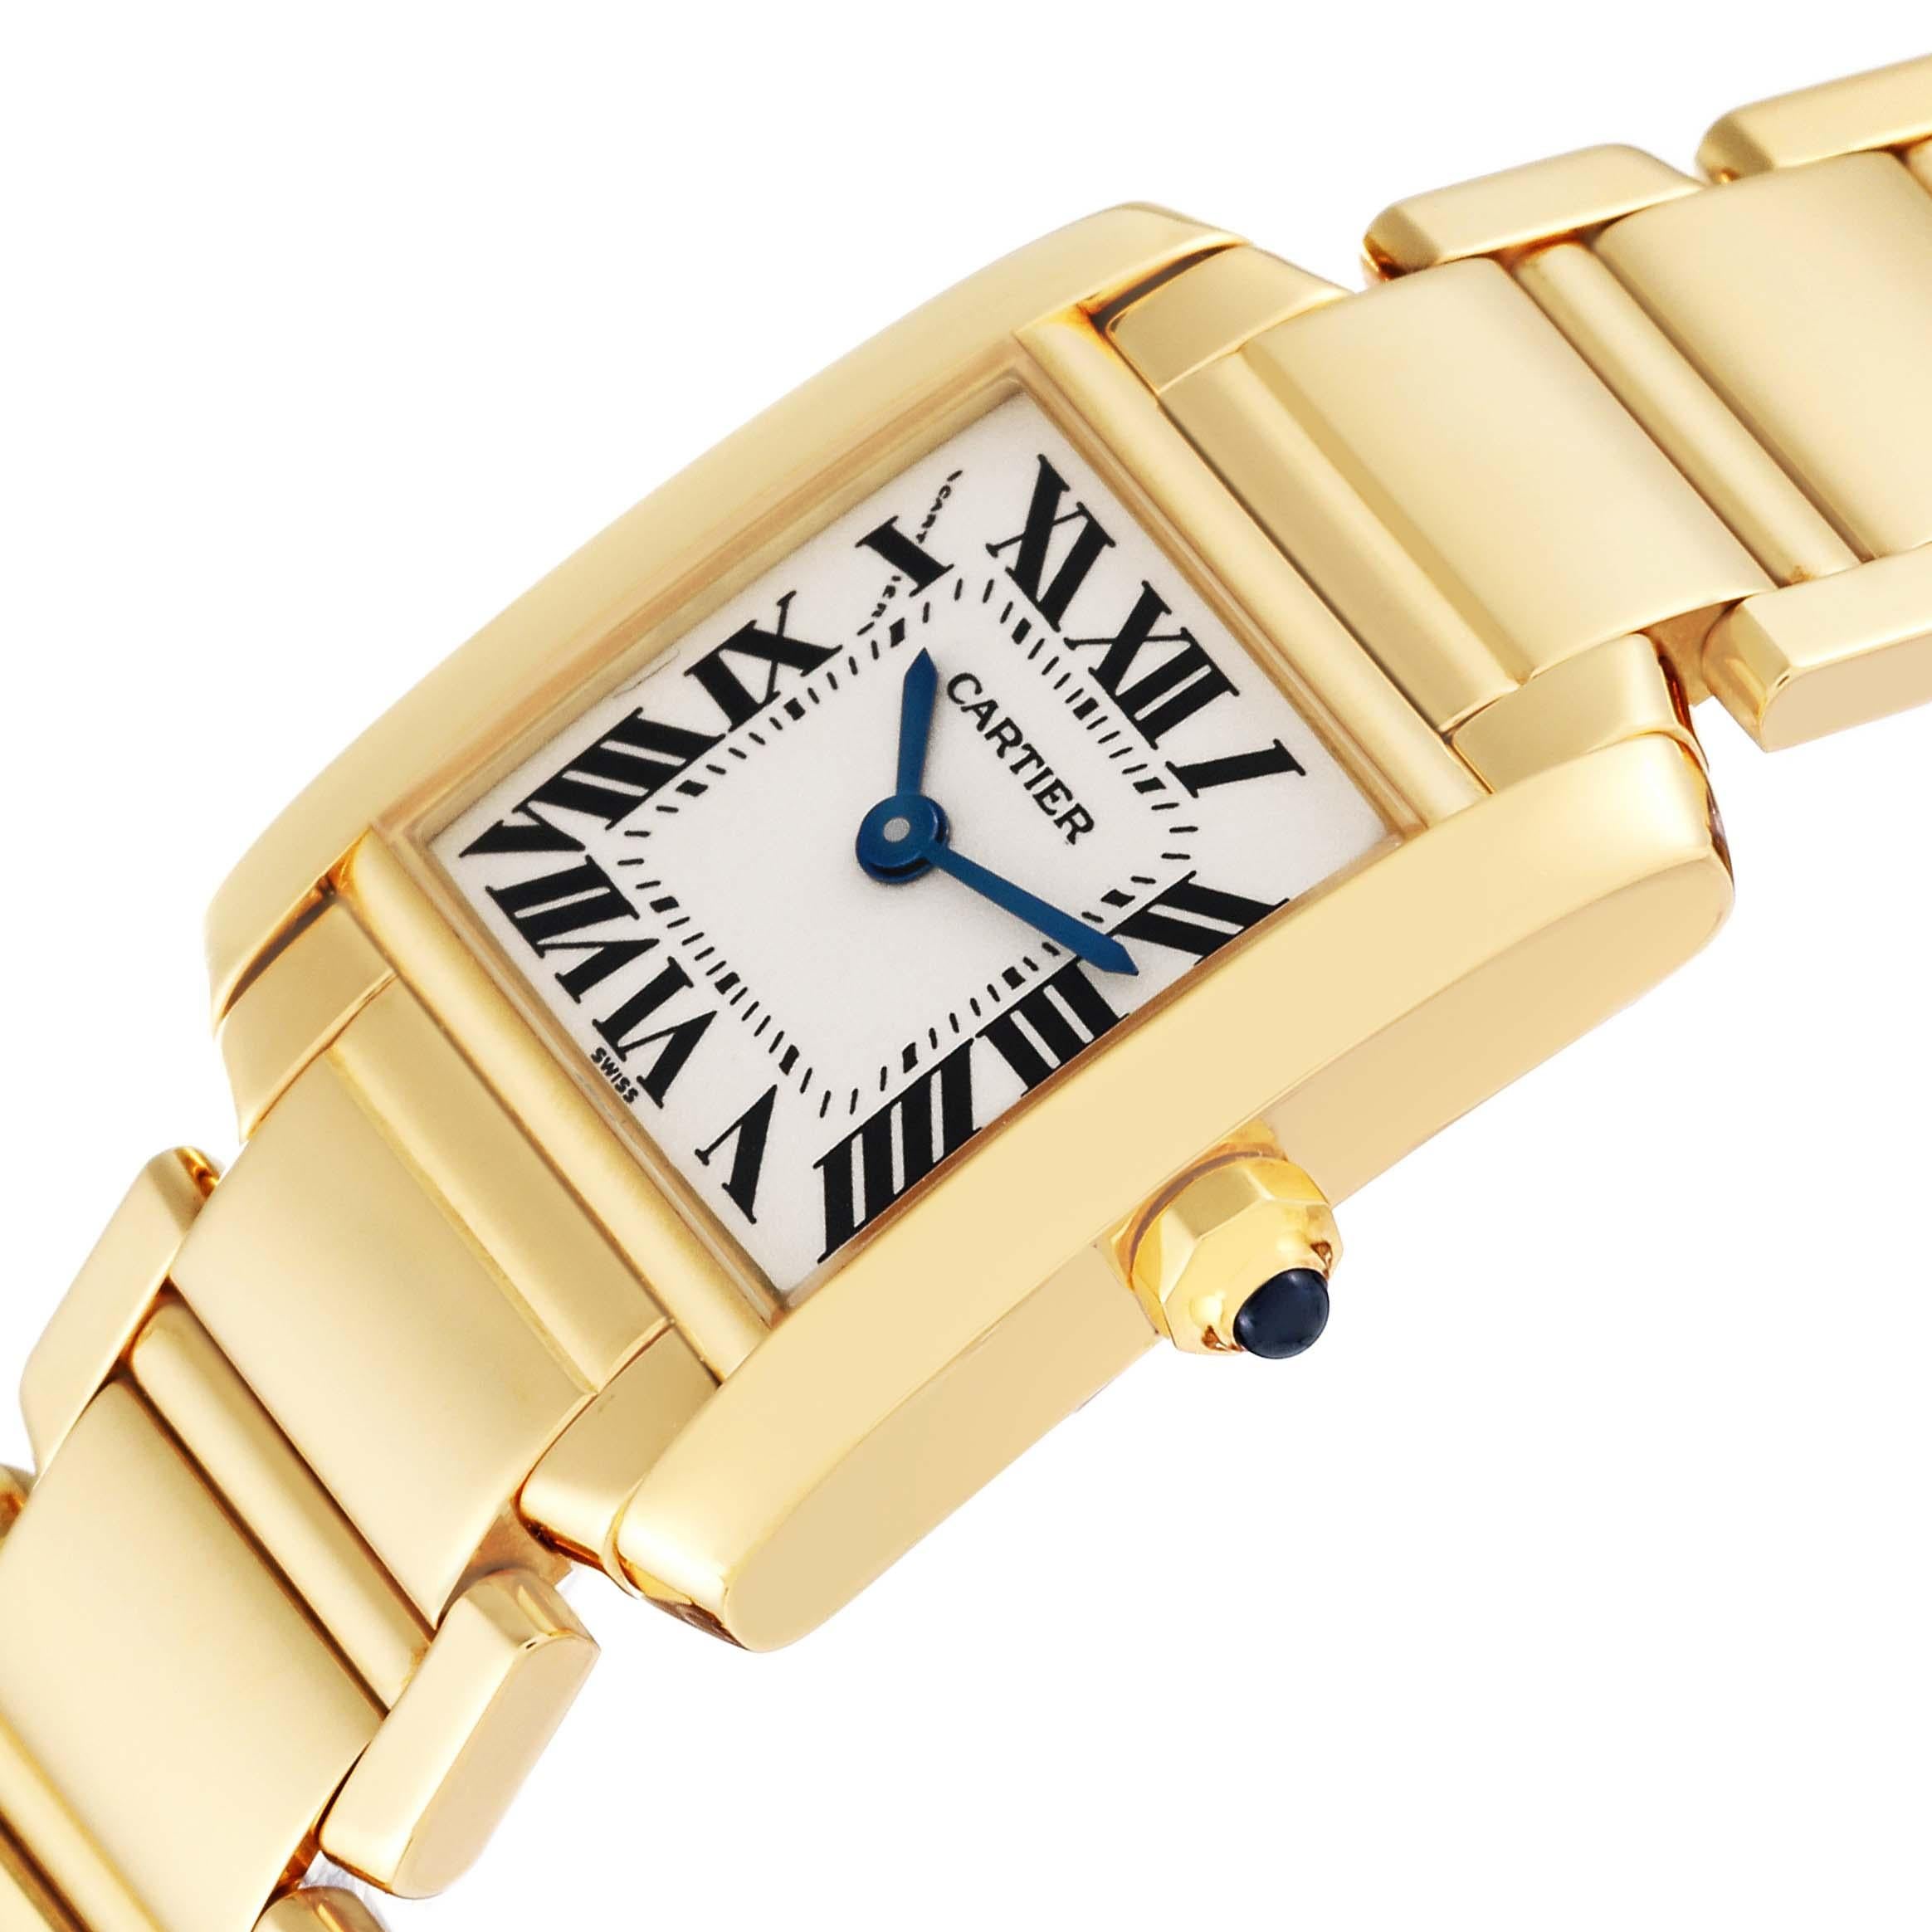 Cartier Tank Francaise Yellow Gold Quartz Ladies Watch W50002N2. Quartz movement. Rectangular 18K yellow gold 20.0 x 25.0 mm case. Octagonal crown set with a blue sapphire cabochon. . Scratch resistant sapphire crystal. Silver dial with black radial